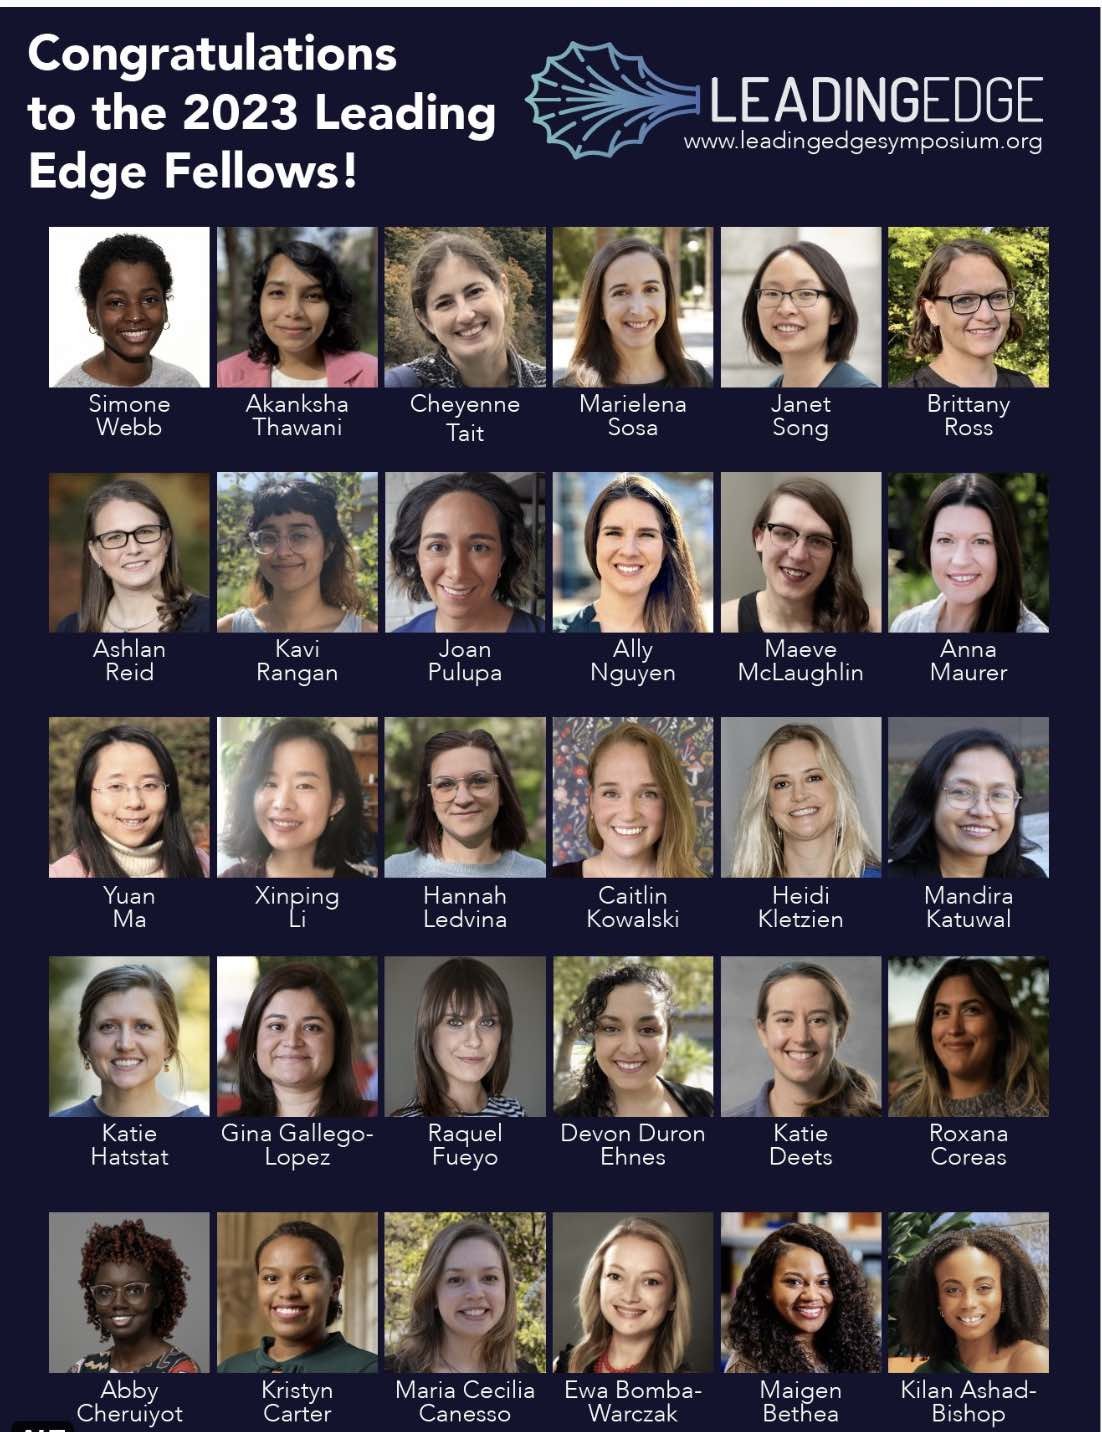 A compilation of 30 portraits, showing all of the fellows, including Joan Pulupa and the rest of this year's biomedical cohort. 